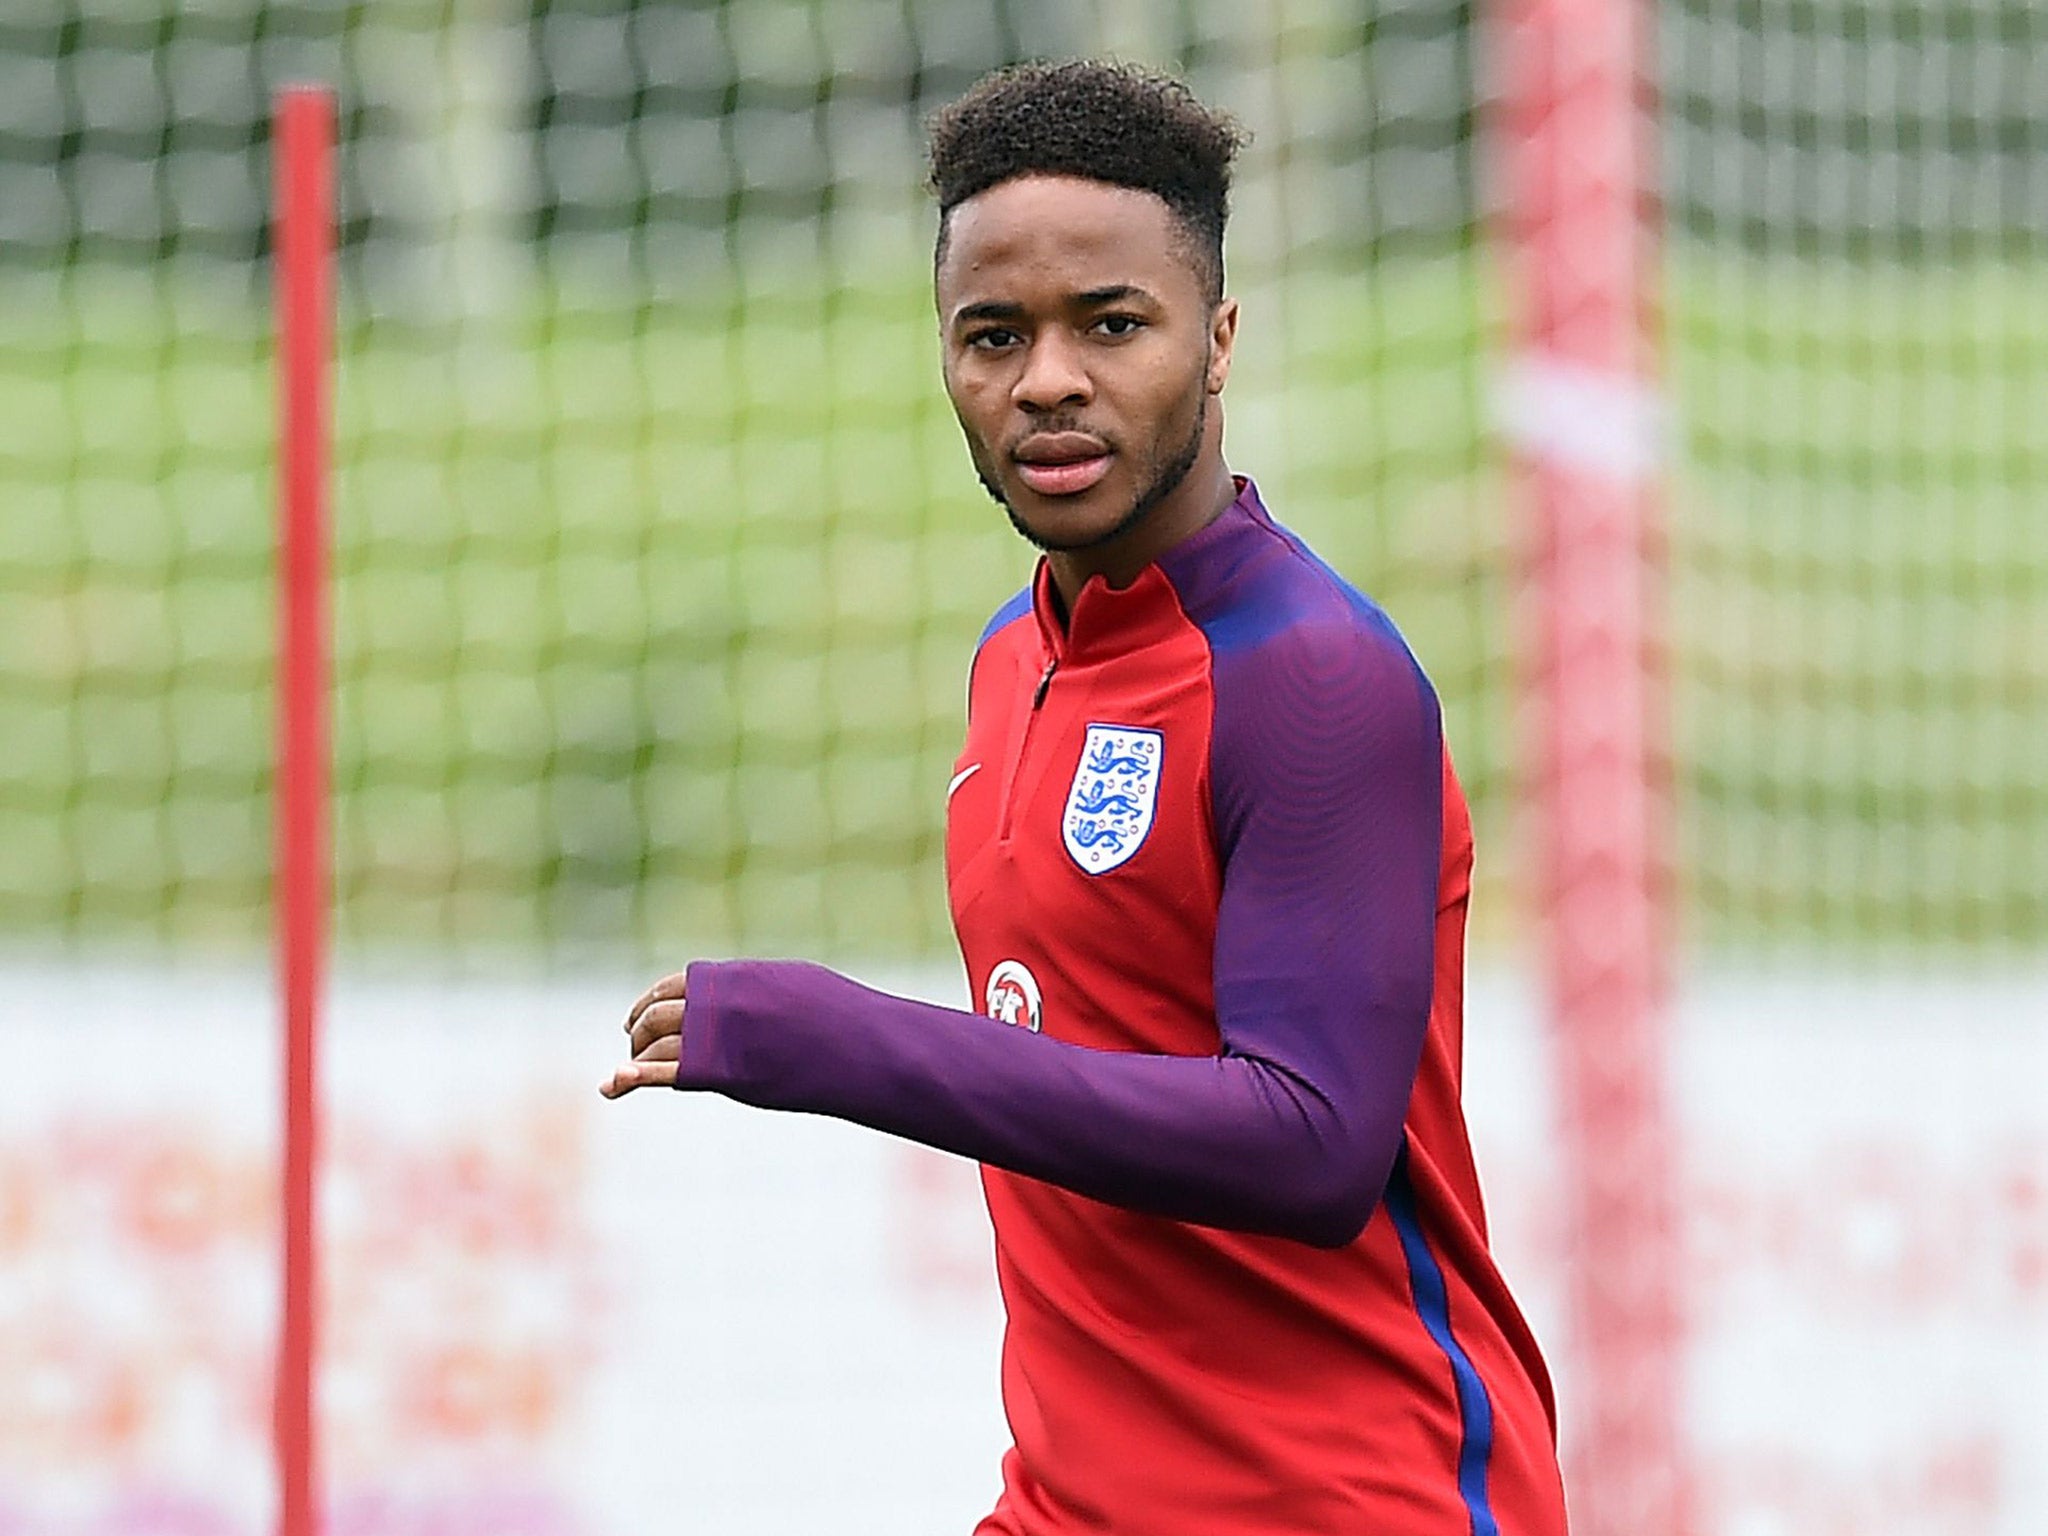 Raheem Sterling has linked up with Dr Steve Peters since joining the England squad